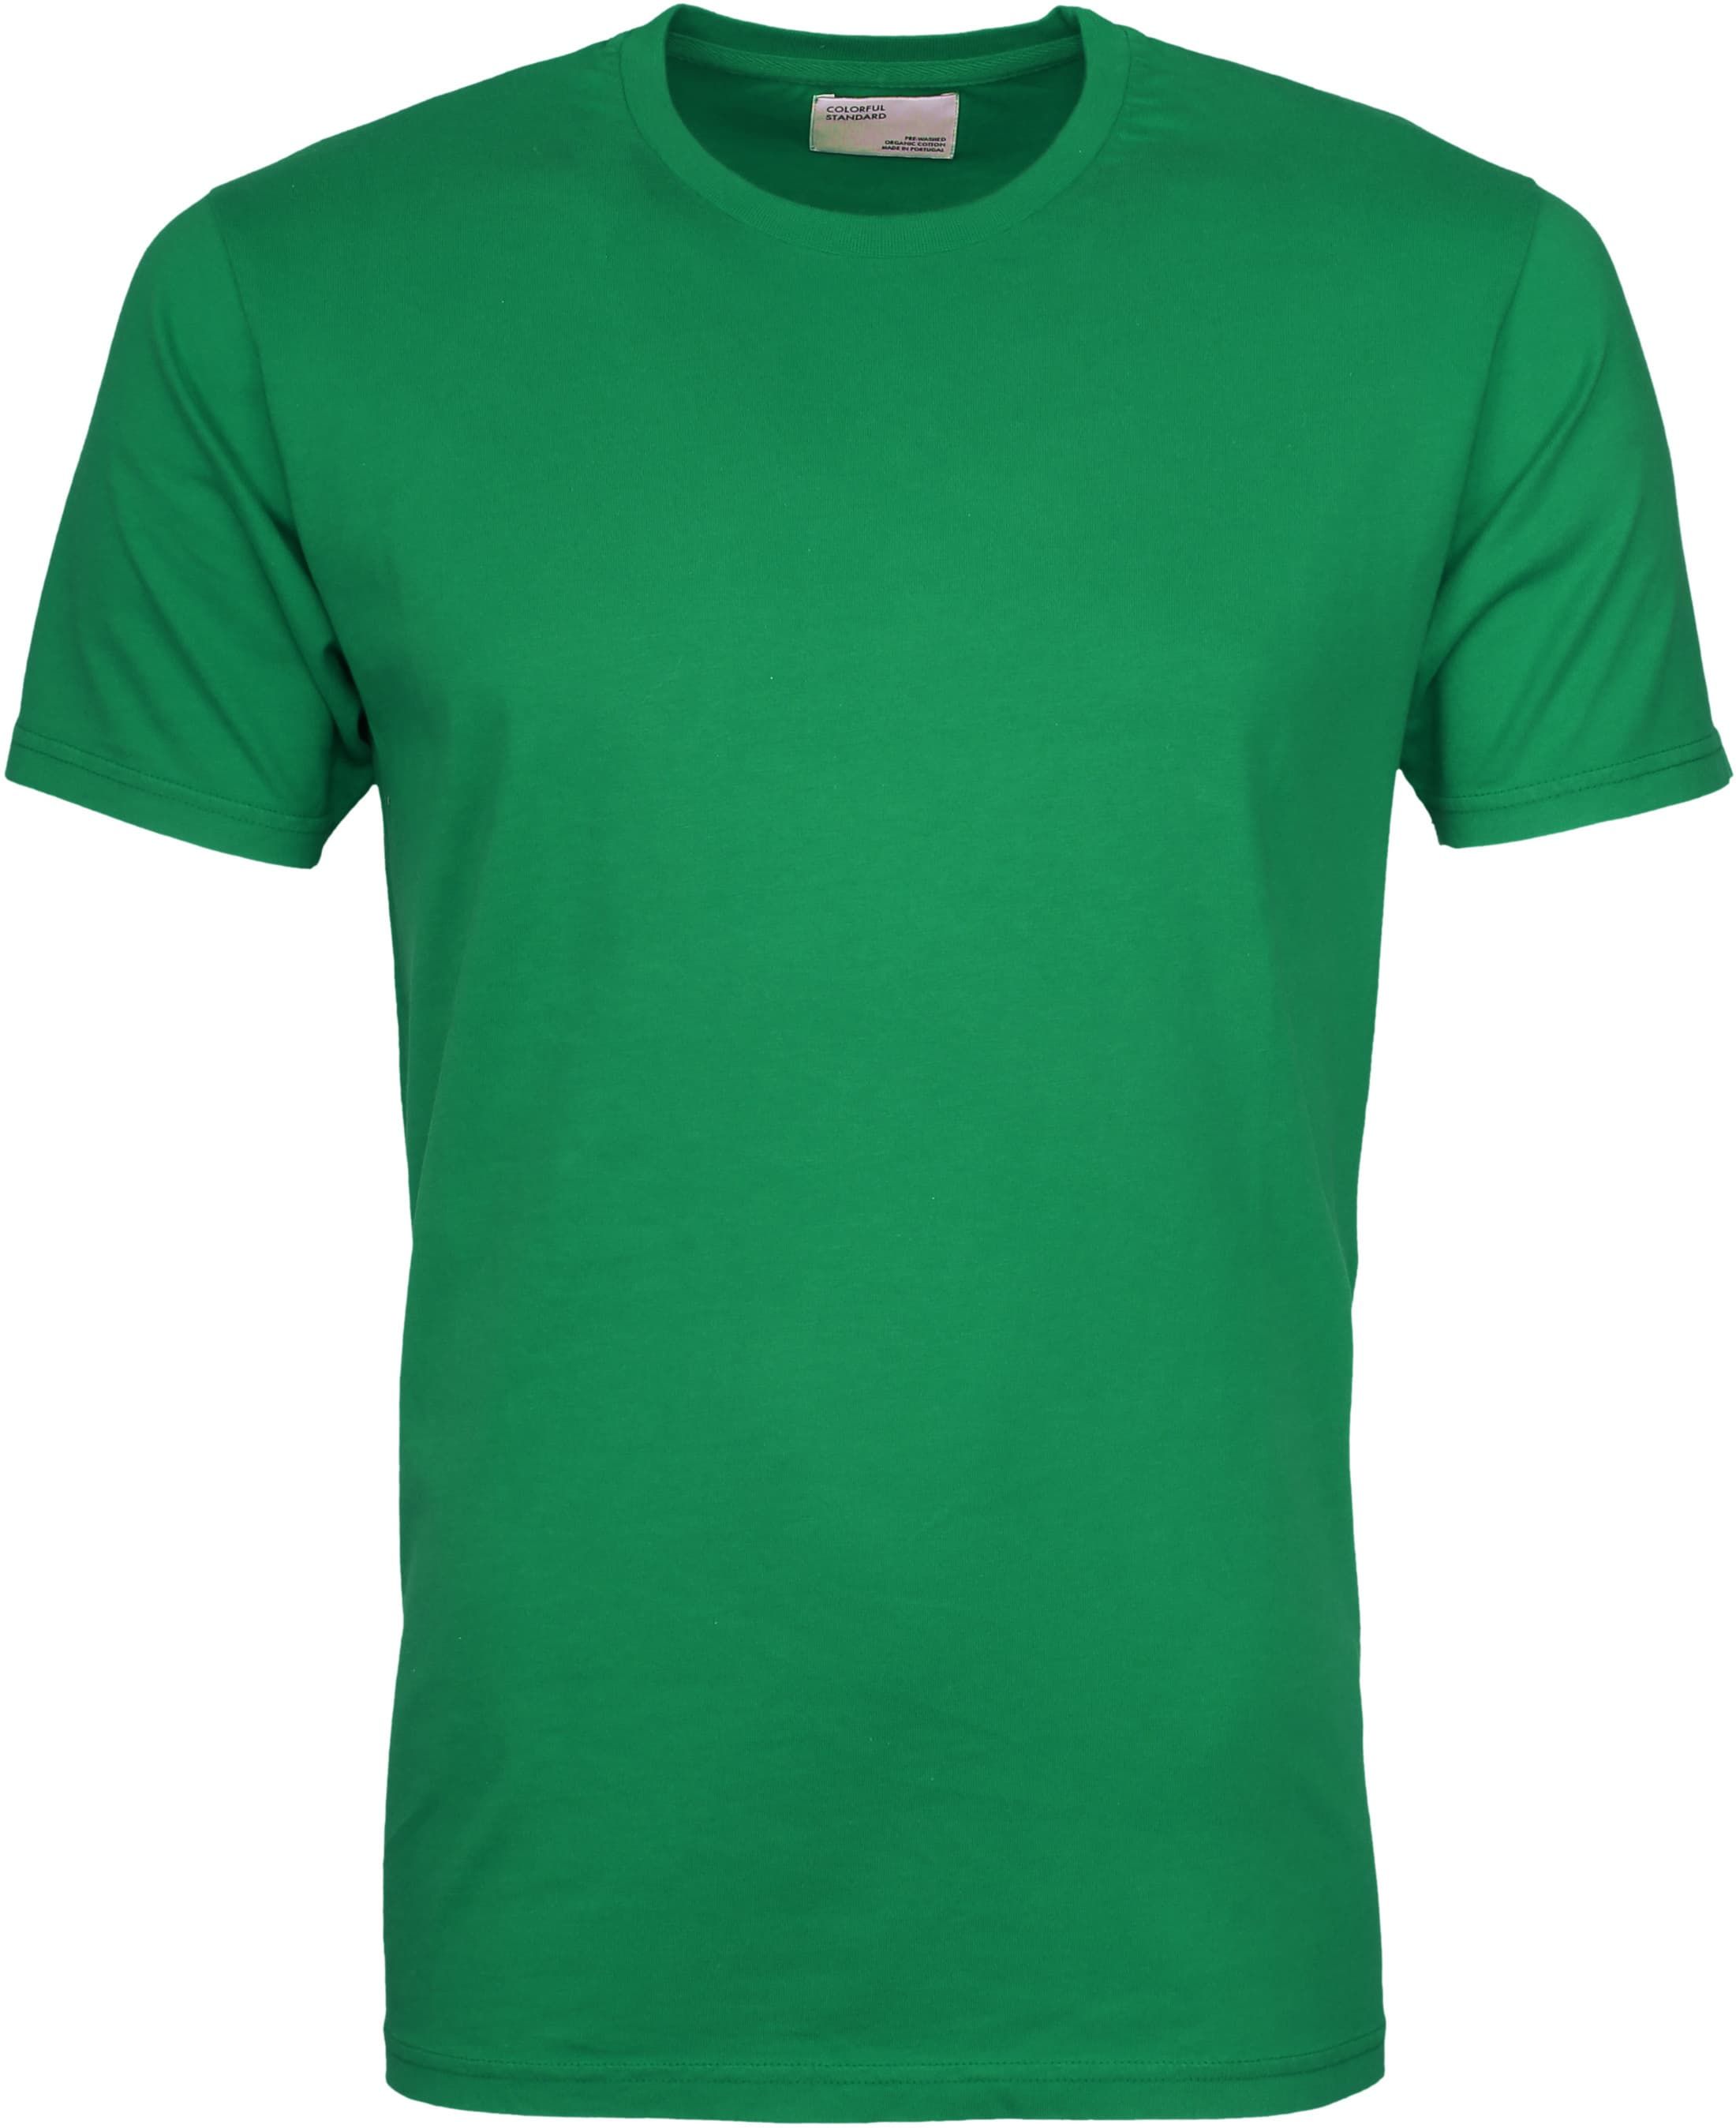 Colorful Standard T-shirt Kelly Green size XL